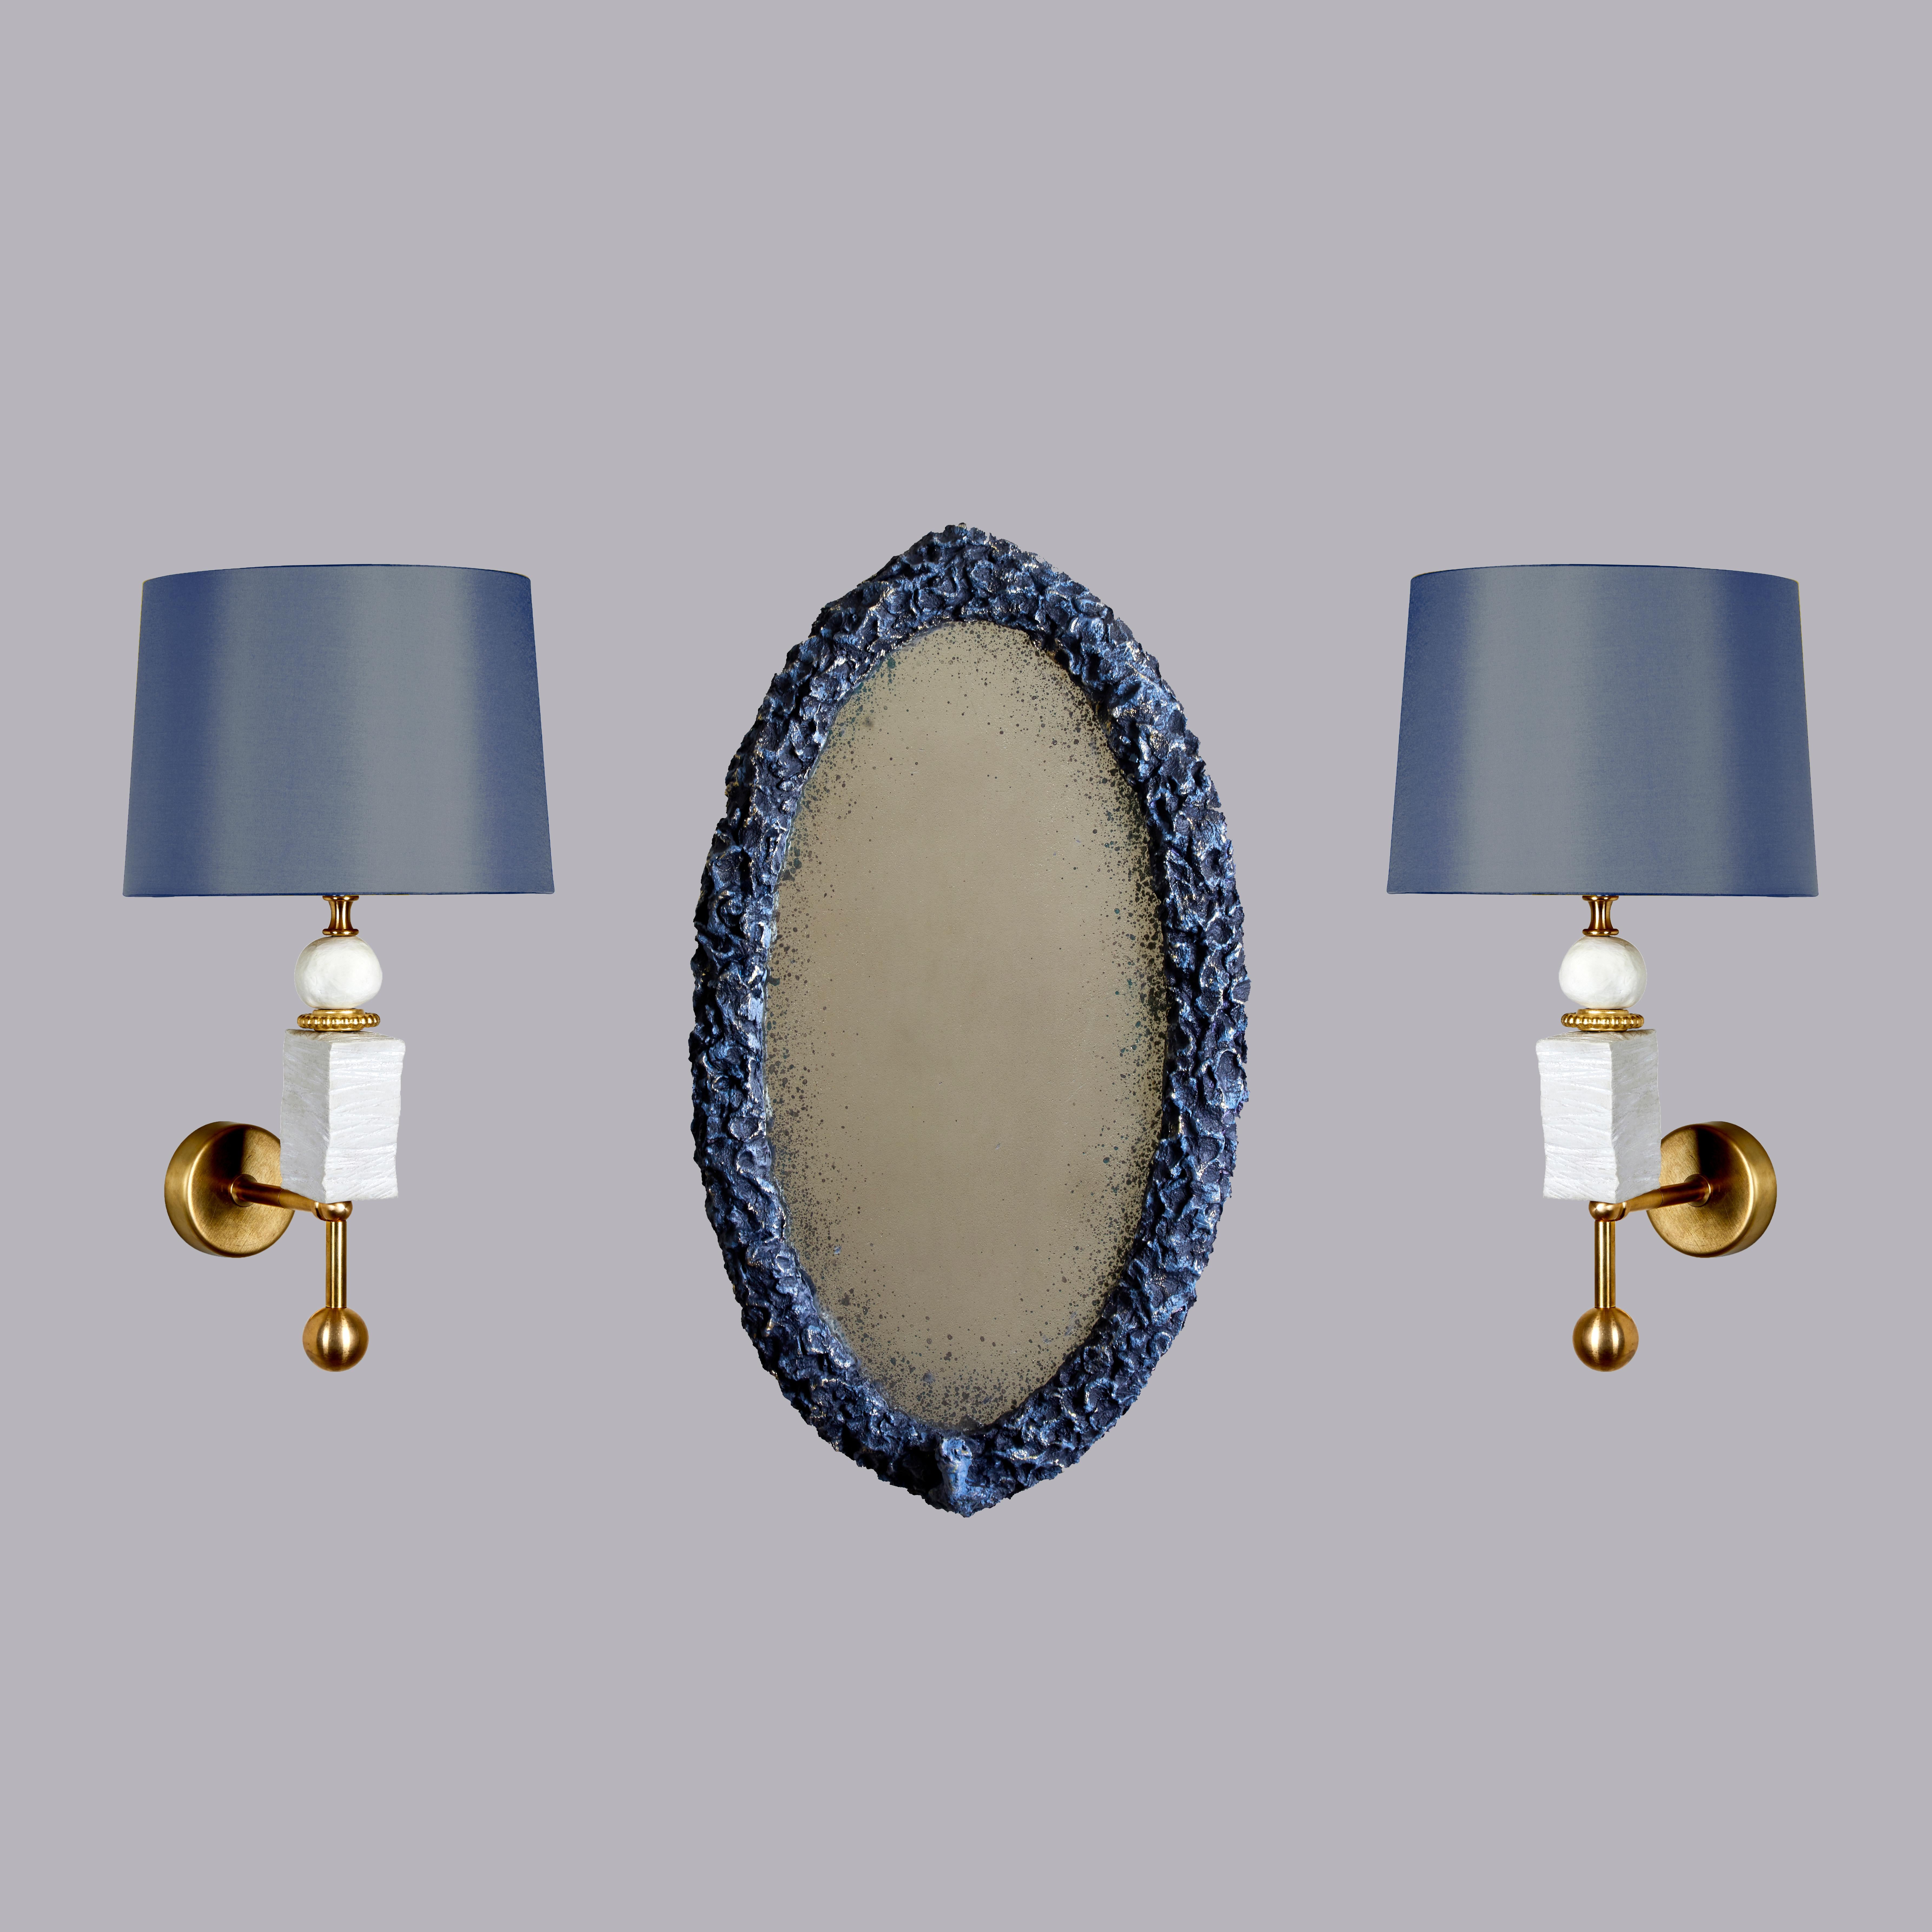 Modern Contemporary Oval Sculpted Mirror in Slate Grey by Margit Wittig